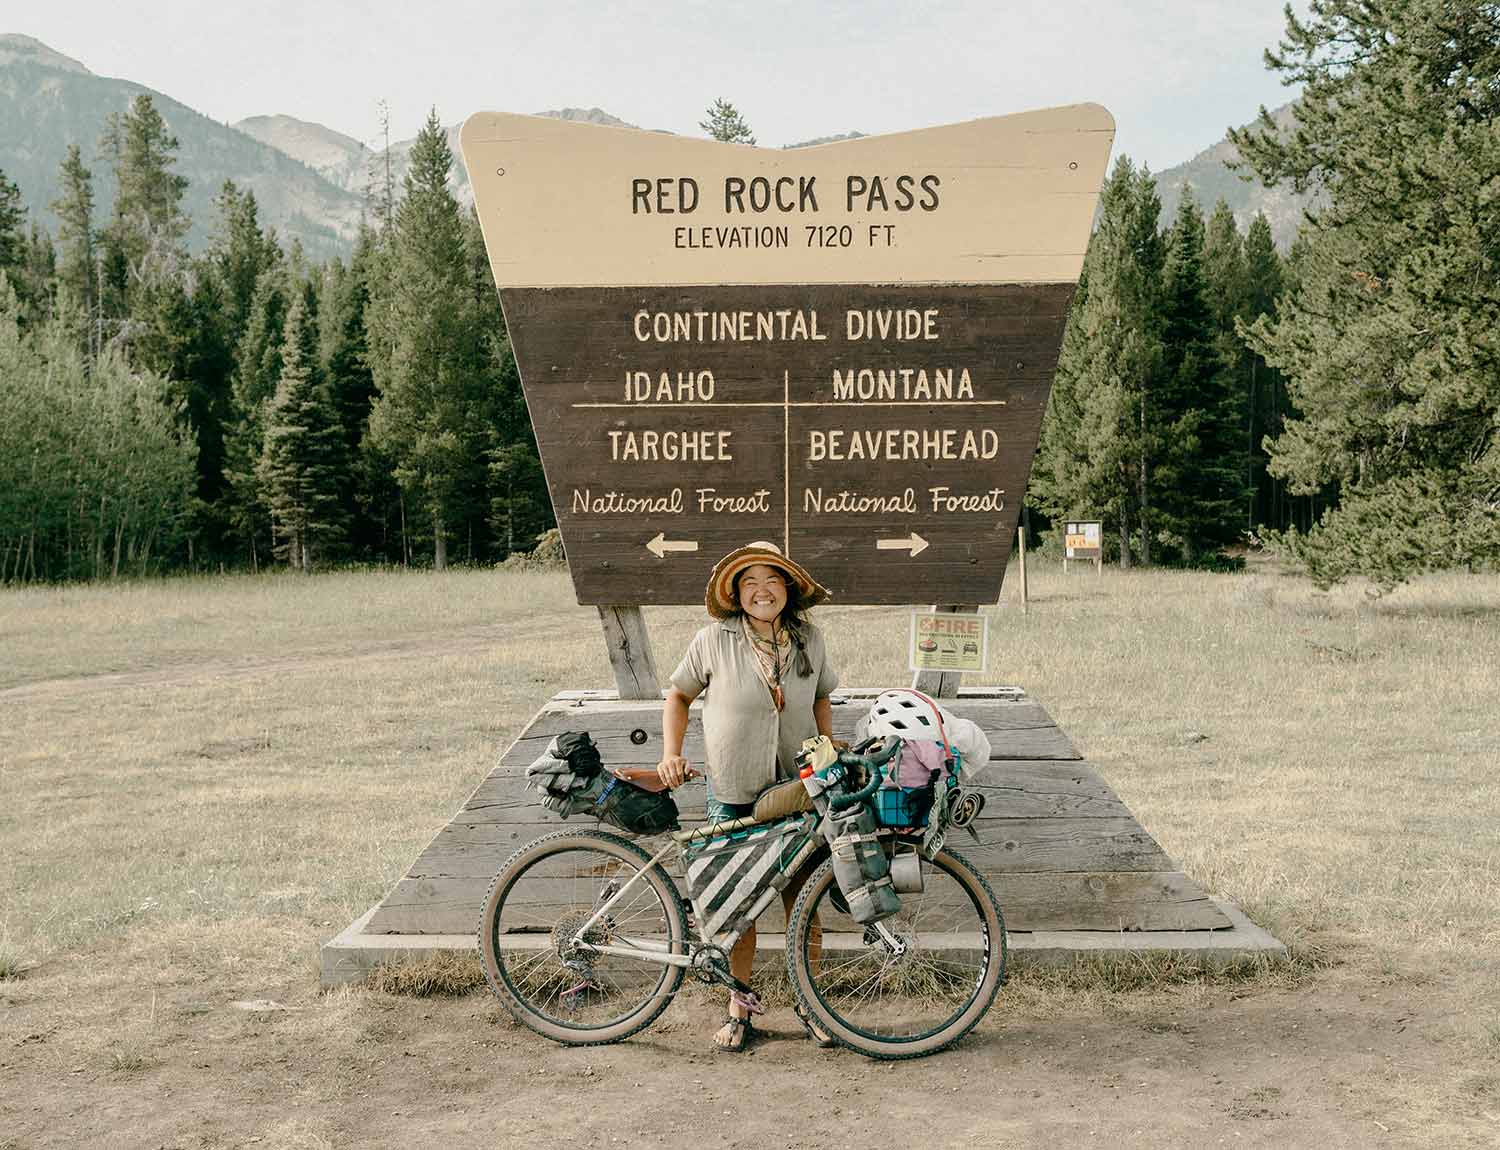 Kae-Lin Wang with fully-loaded bike in front of Red Rock Pass sign on the continental divide